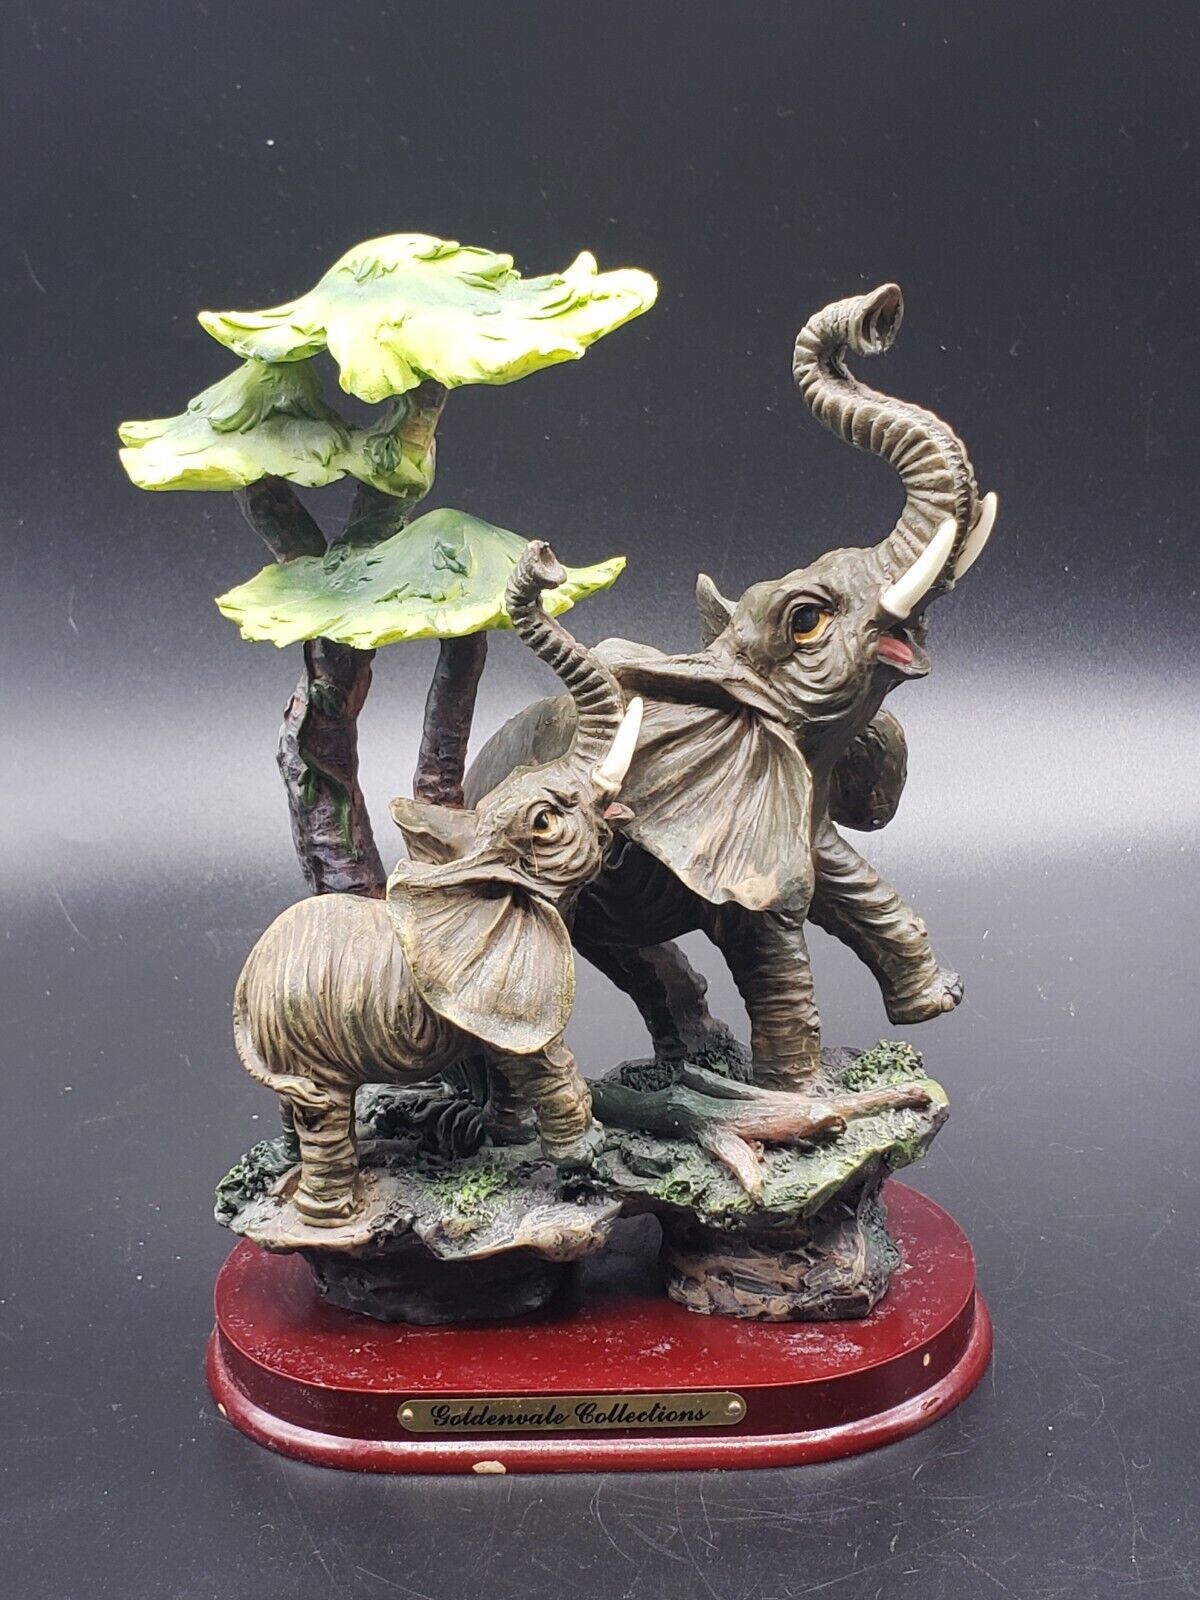 Vintage Goldenvale Collection Elephants Figurine With Trees Resin 